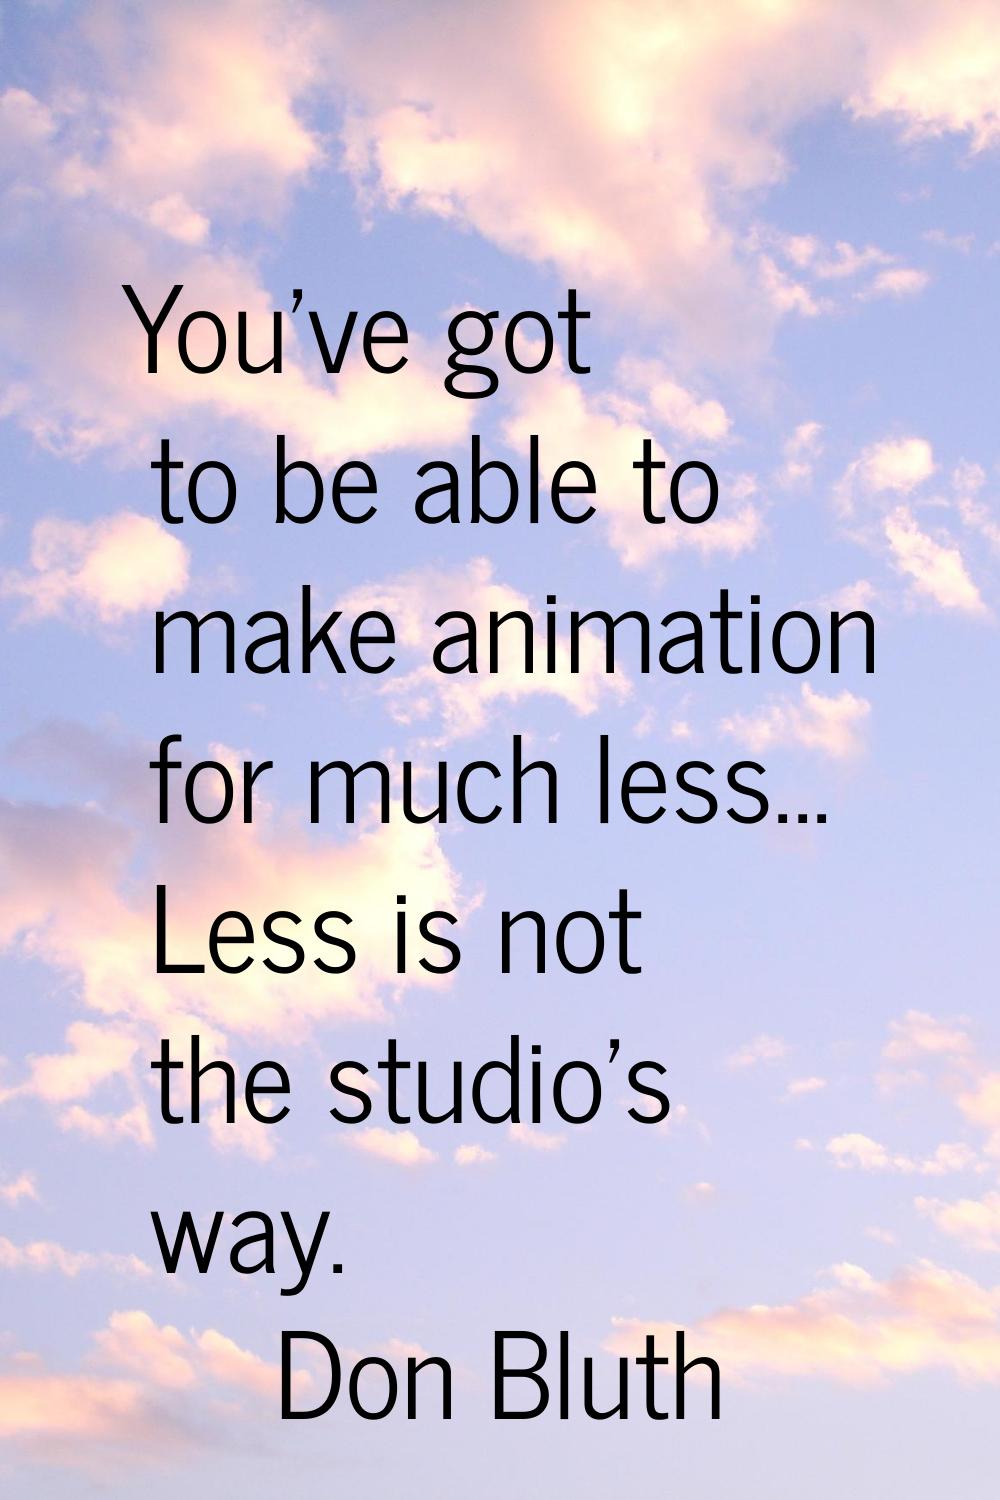 You've got to be able to make animation for much less... Less is not the studio's way.